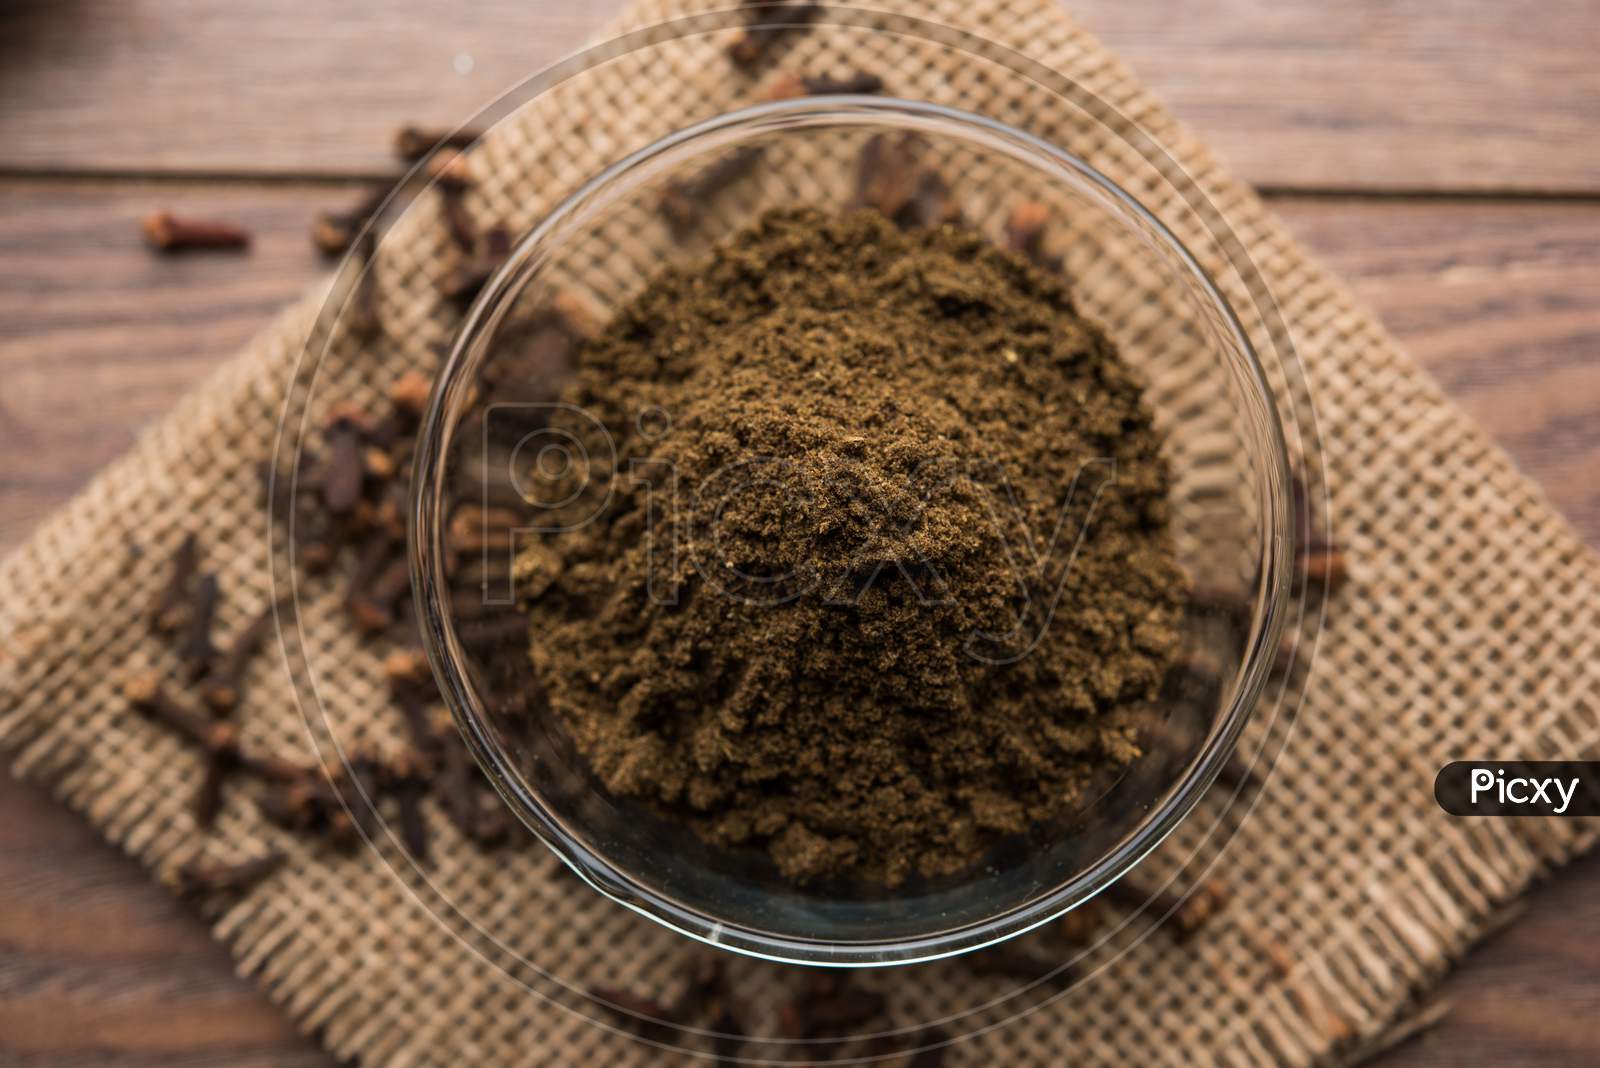 Cloves or laung or lavang powder